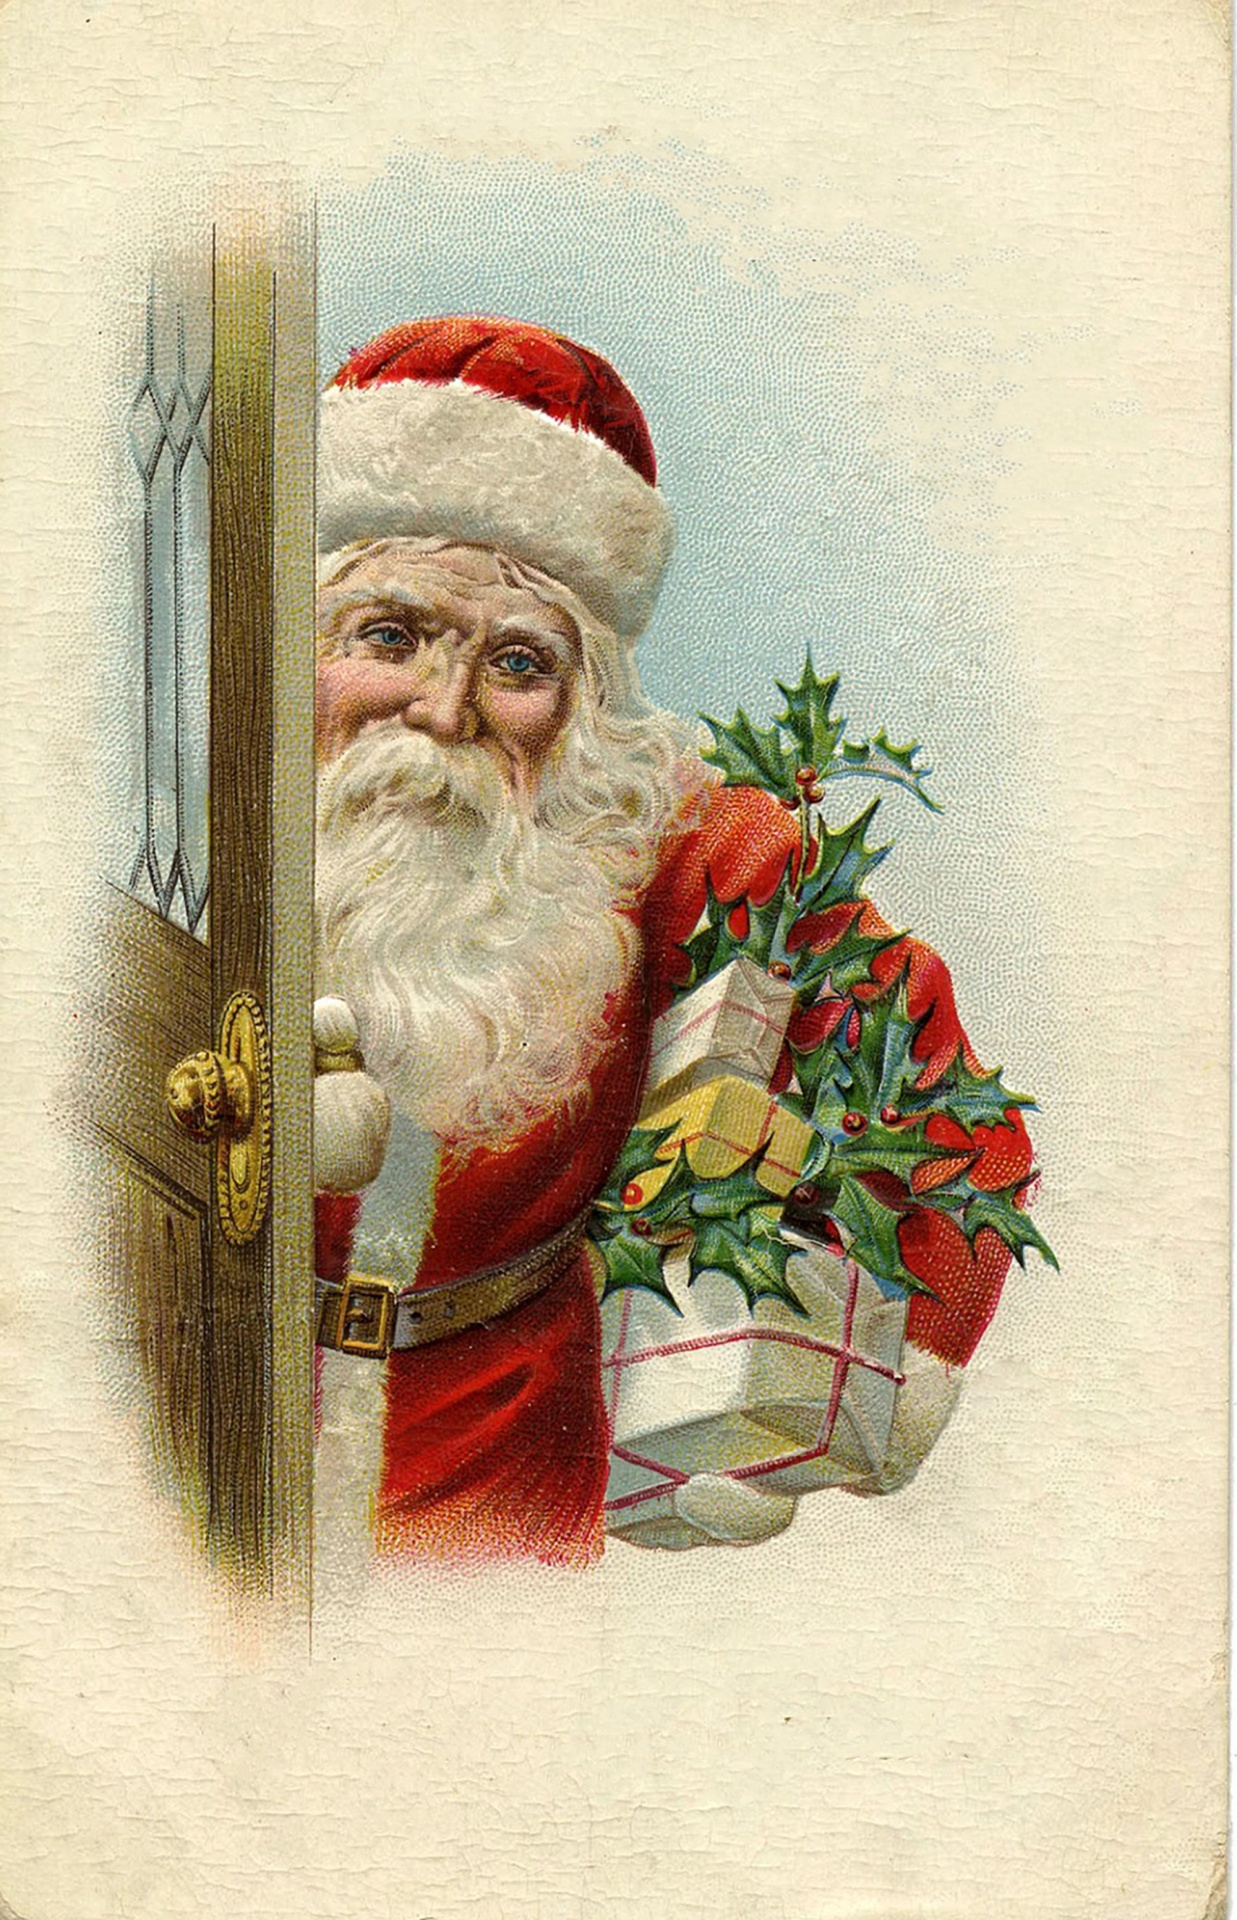 Vintage Christmas Santa entering through the door carrying a pile of presents